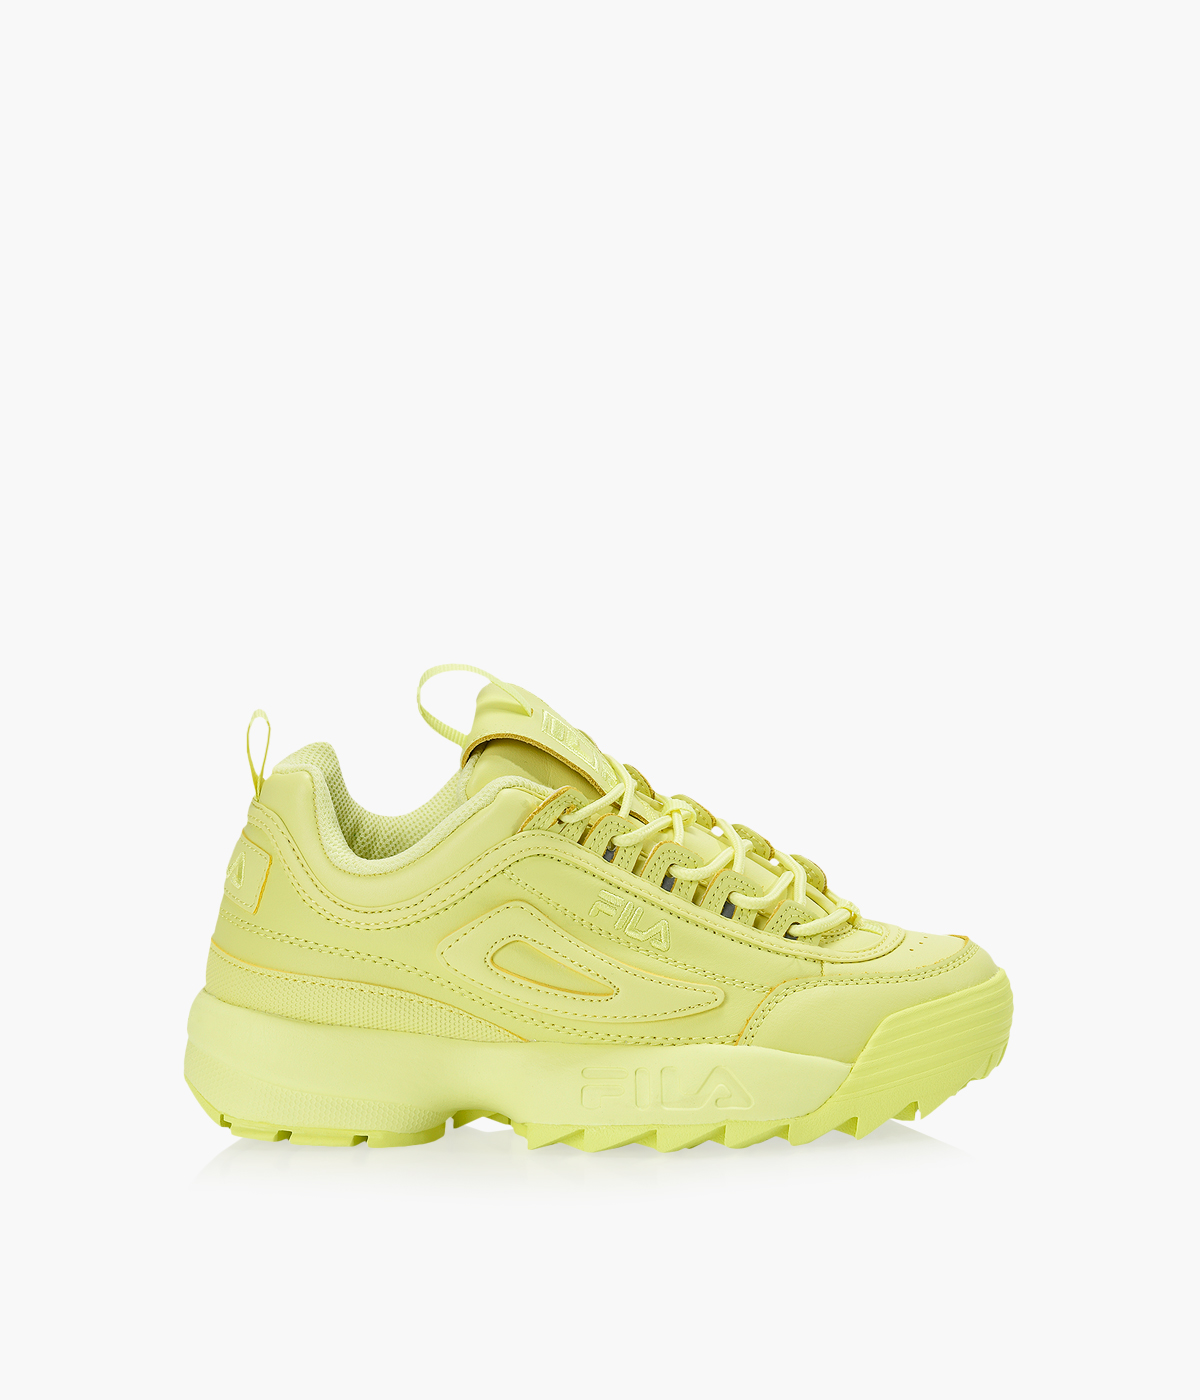 FILA DISRUPTOR II - Yellow Leather | Browns Shoes